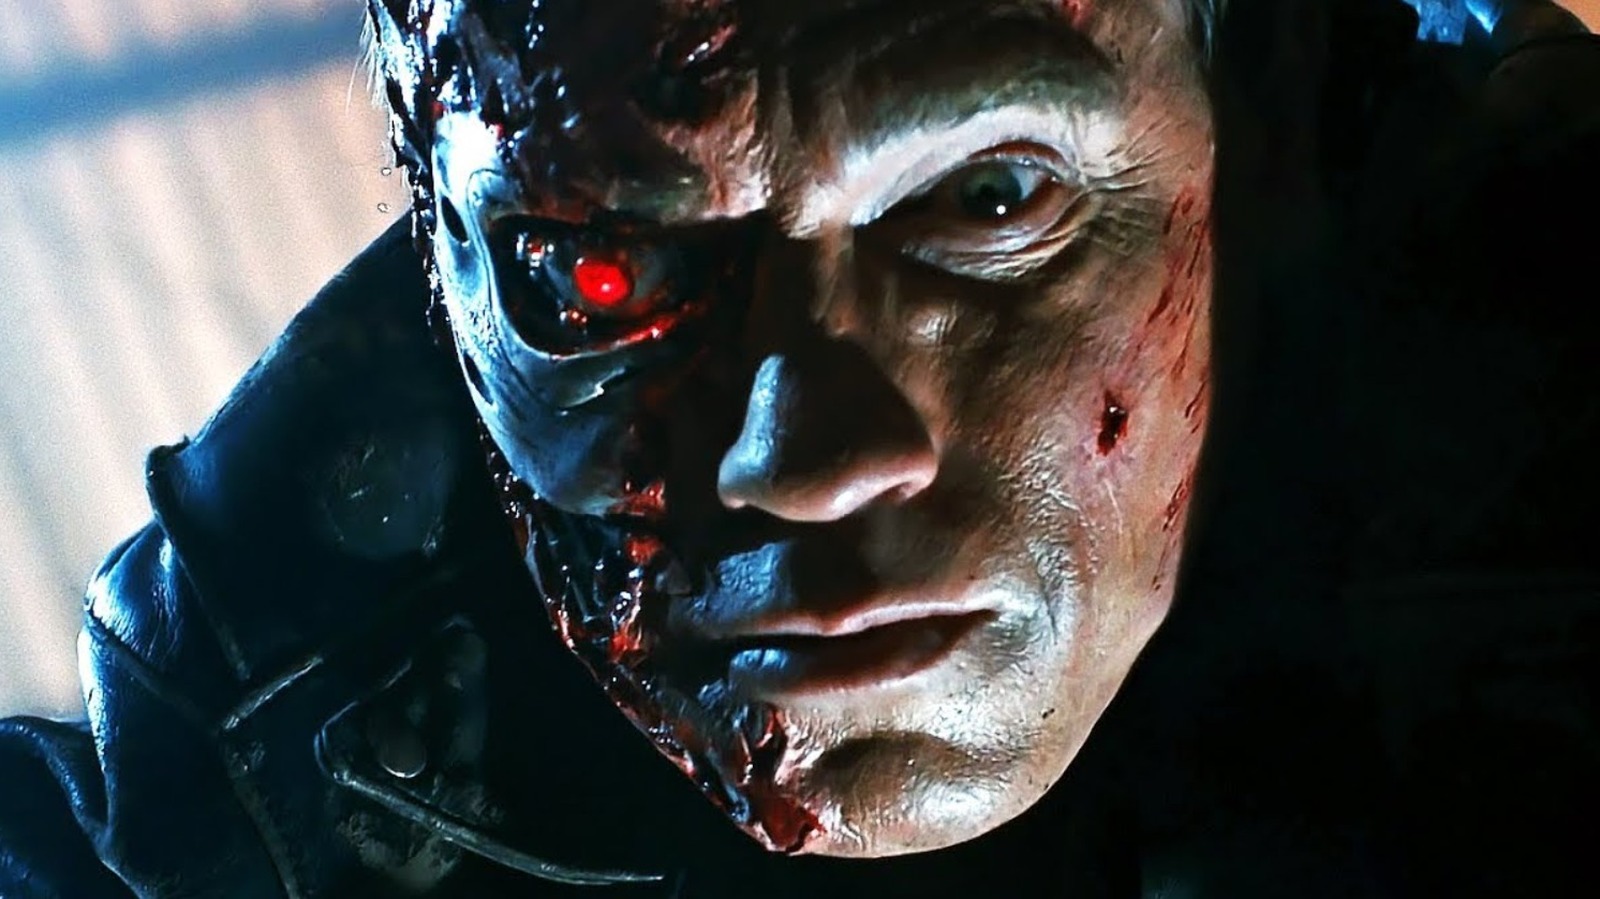 Terminator Anime Series Release Date, Cast, And Plot - What We Know So Far